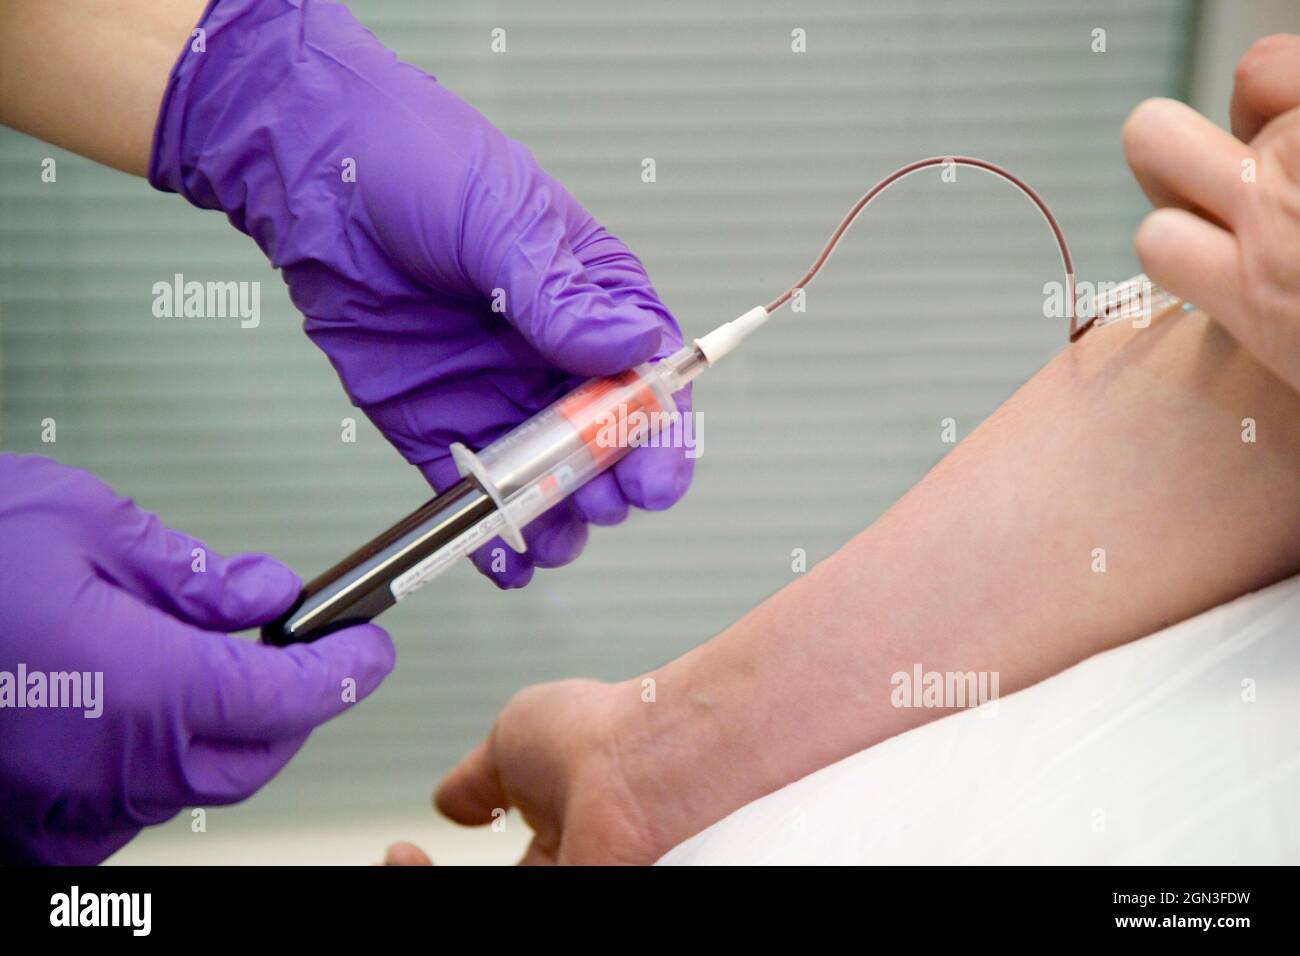 Taking blood sample for medical research - needle is inserted into vein with a tourniquet around the upper arm to make the vein prominent.  The blood Stock Photo